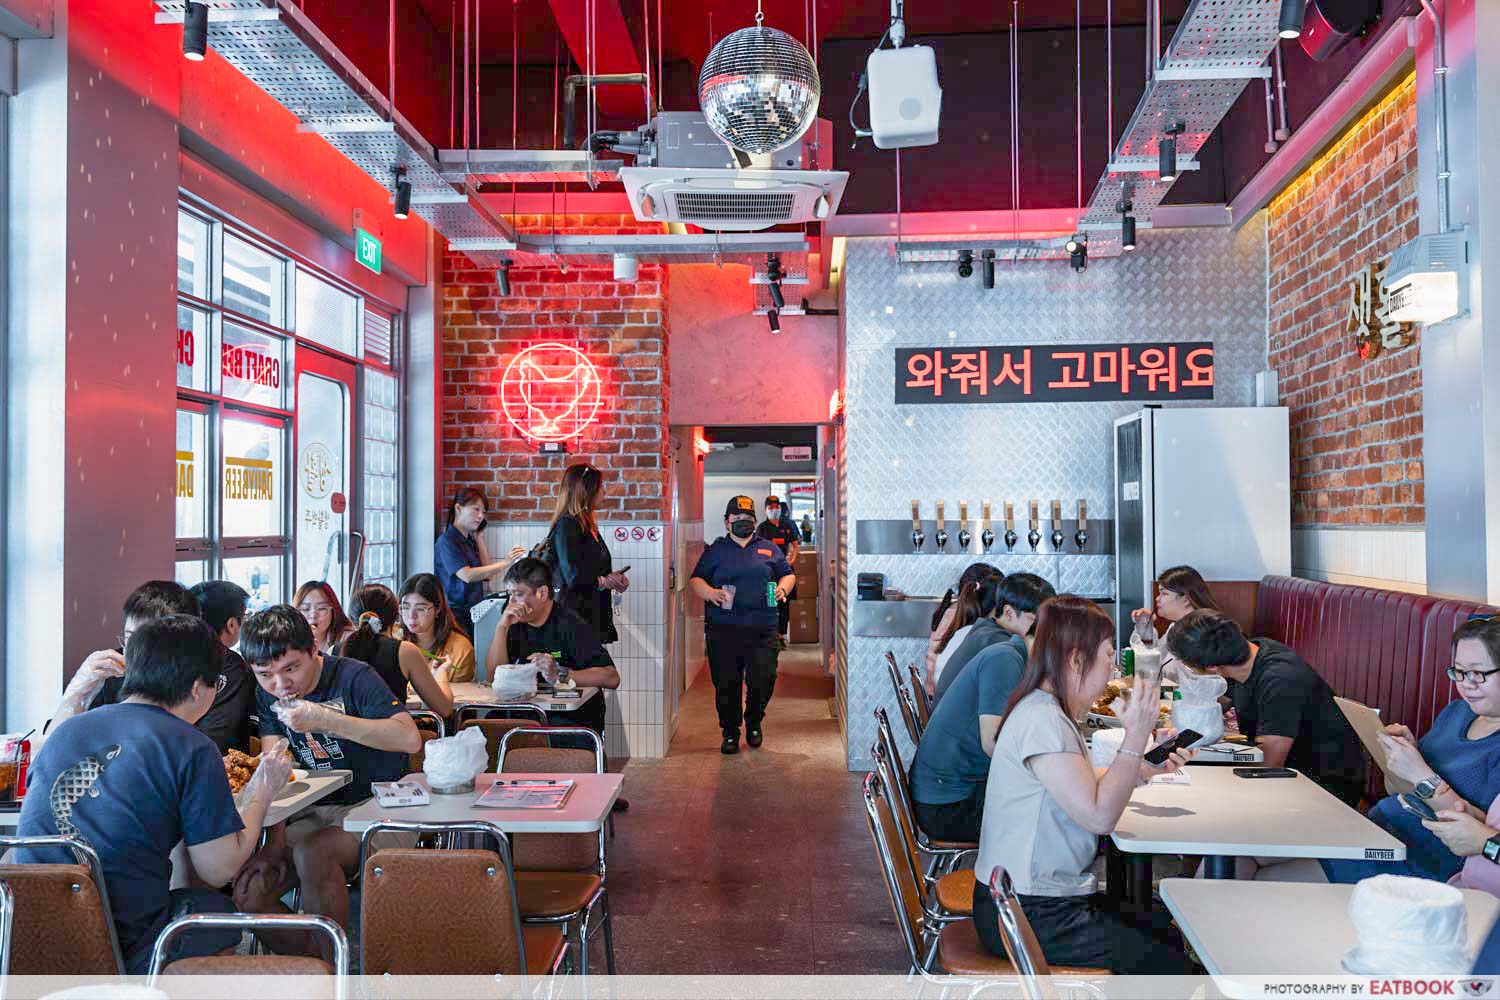 Daily Beer: Popular Korean Fried Chicken And Craft Beer Chain Opens In SG